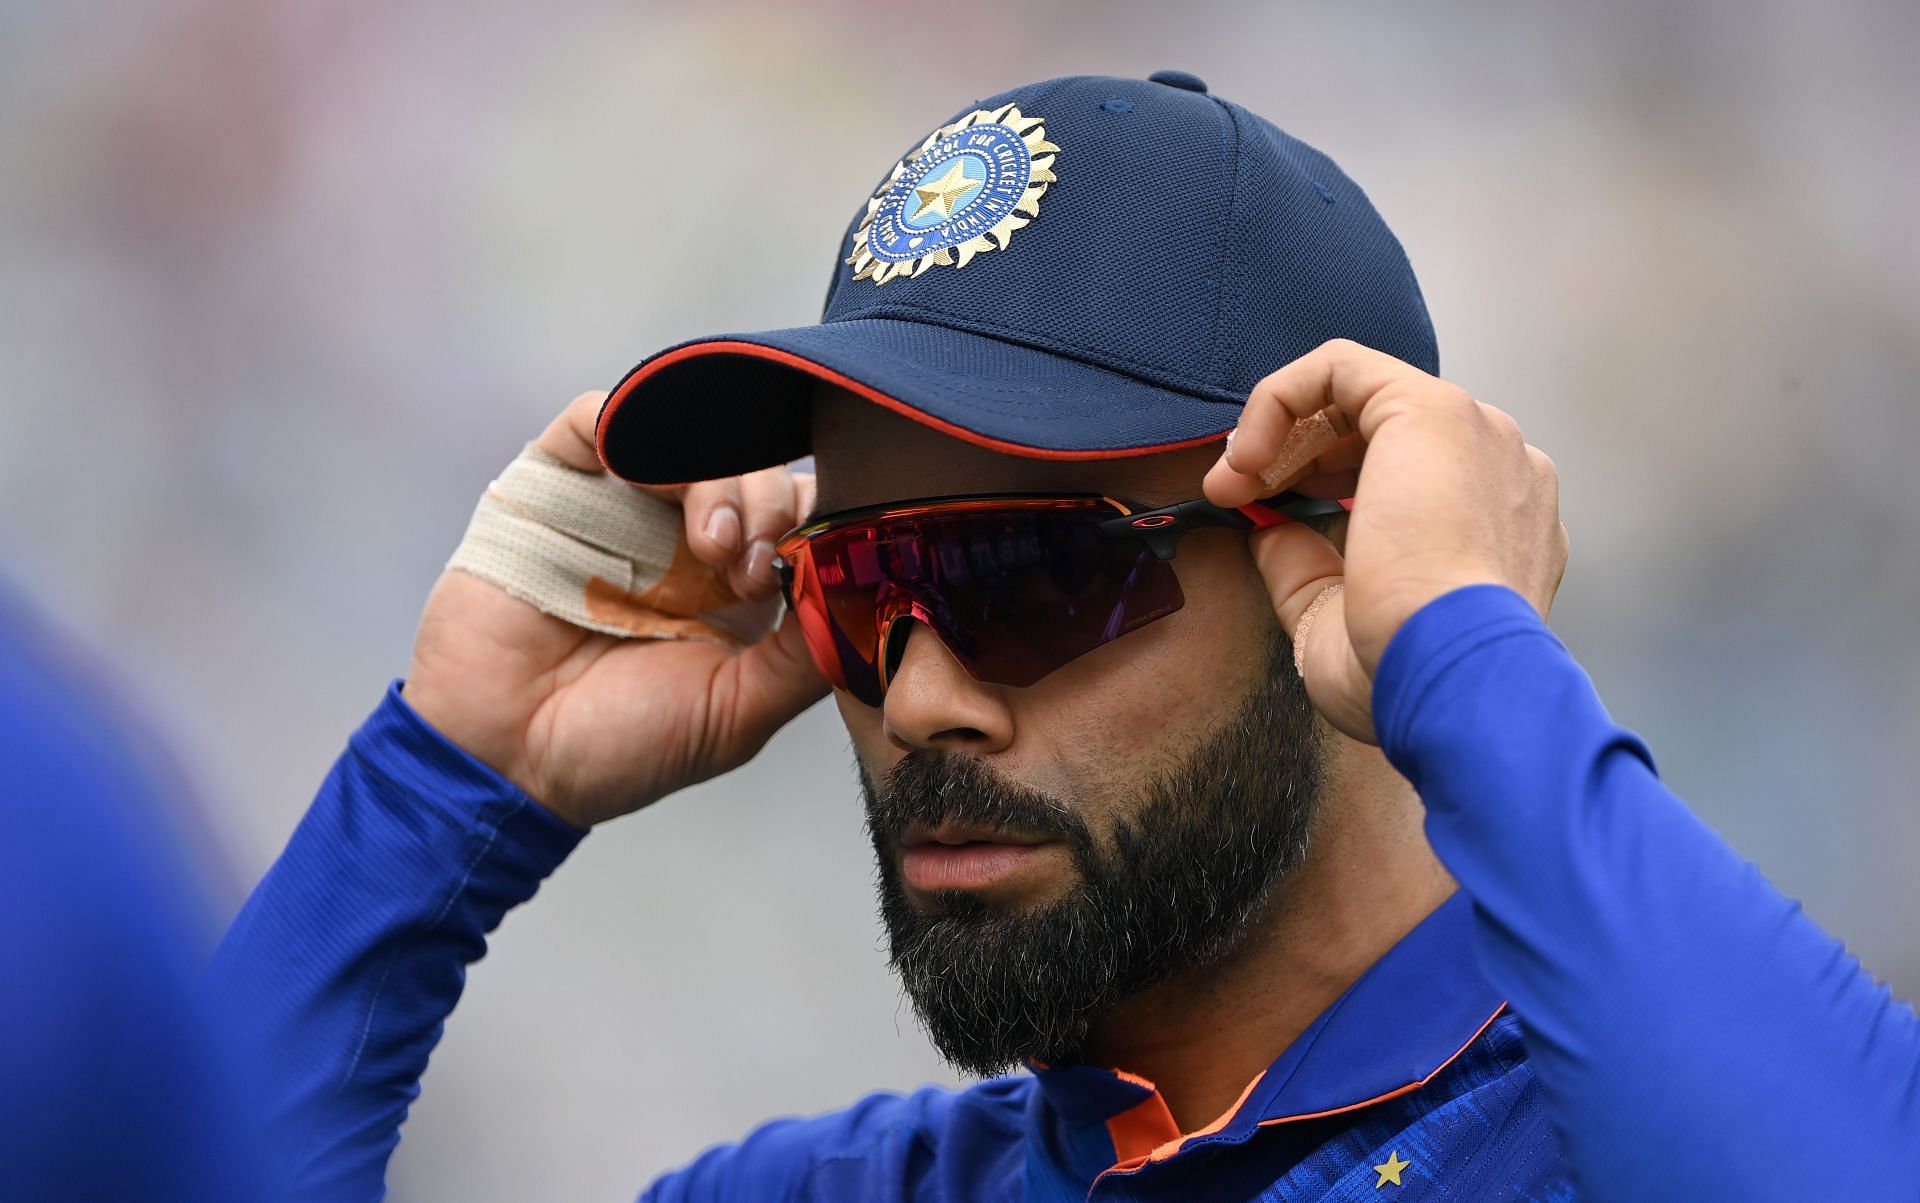 The former India captain is in dire need of runs at the moment